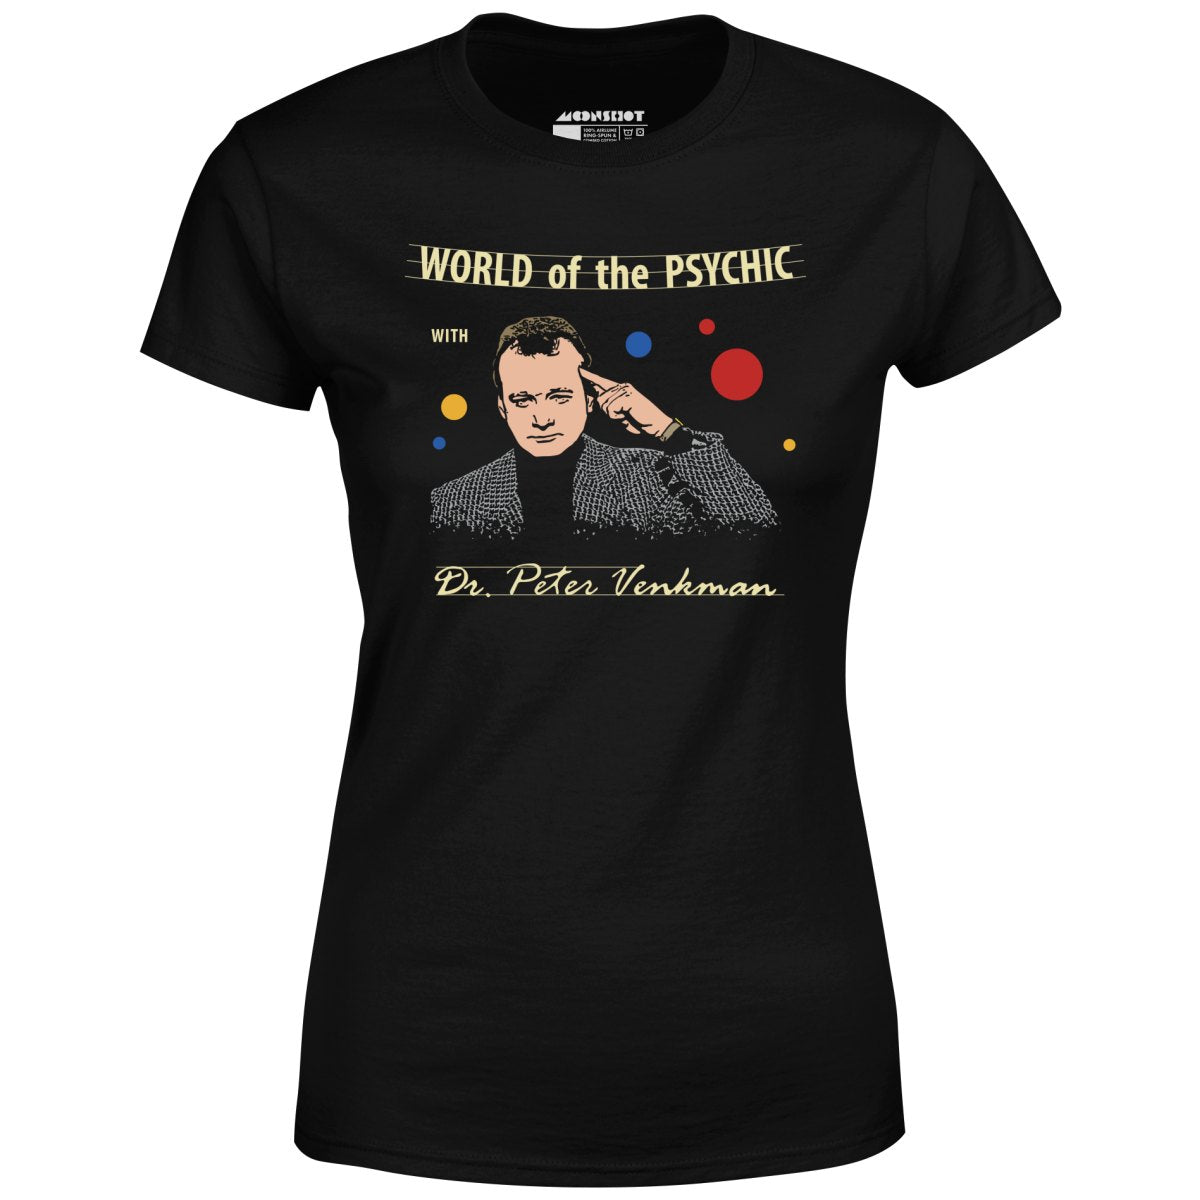 World of the Psychic with Dr. Peter Venkman - Women's T-Shirt